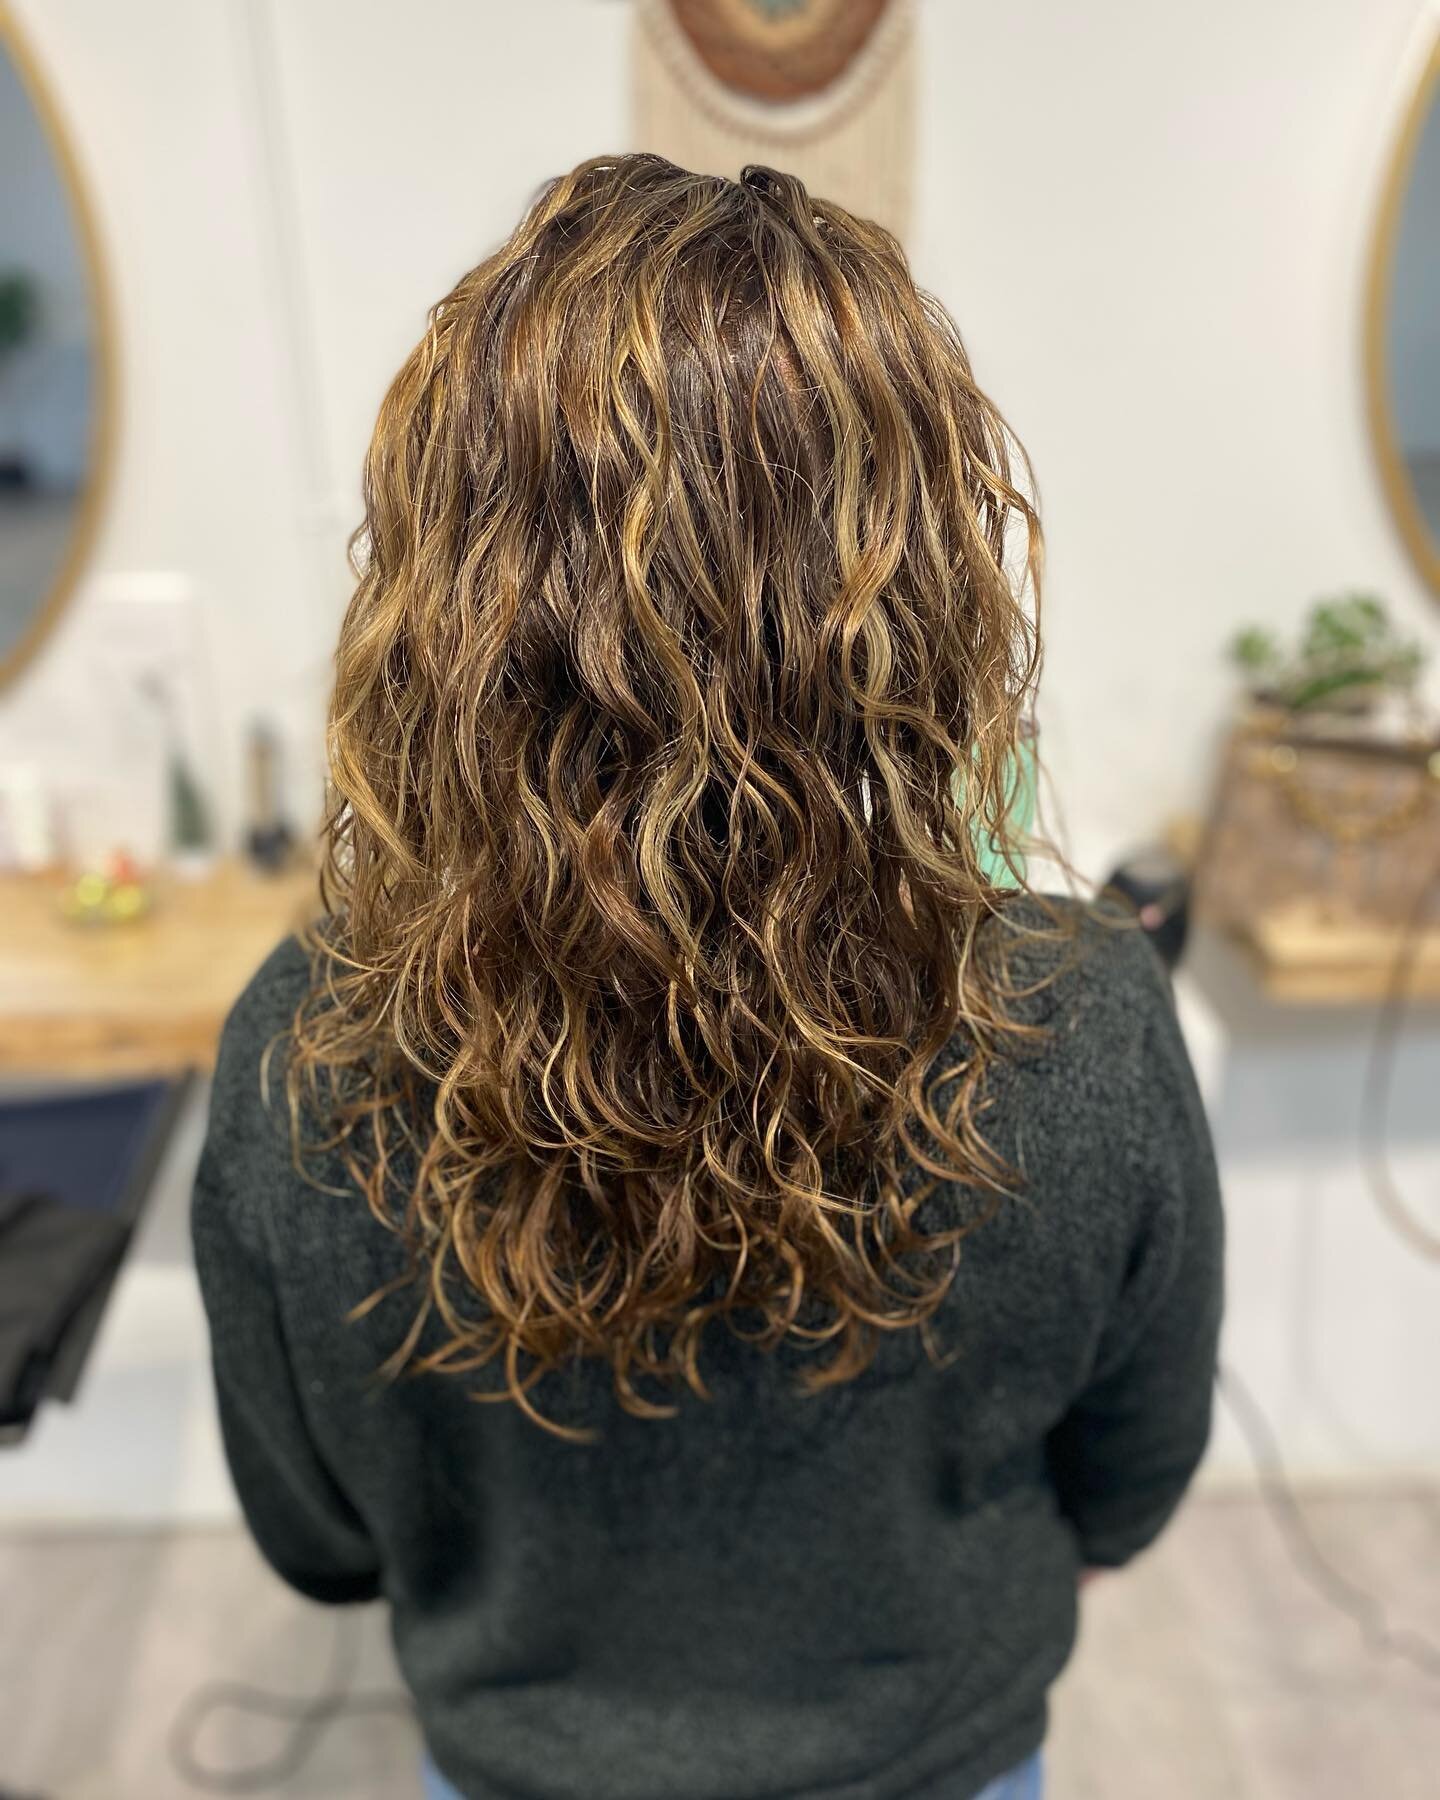 When you work with an amazing team of stylists and you can work together to create an amazing masterpiece!! 
We love working together as a team to make our clients look and feel beautiful!! 
Curly cut by @garnette_ecohairgirl 
Color by @beautybyshena